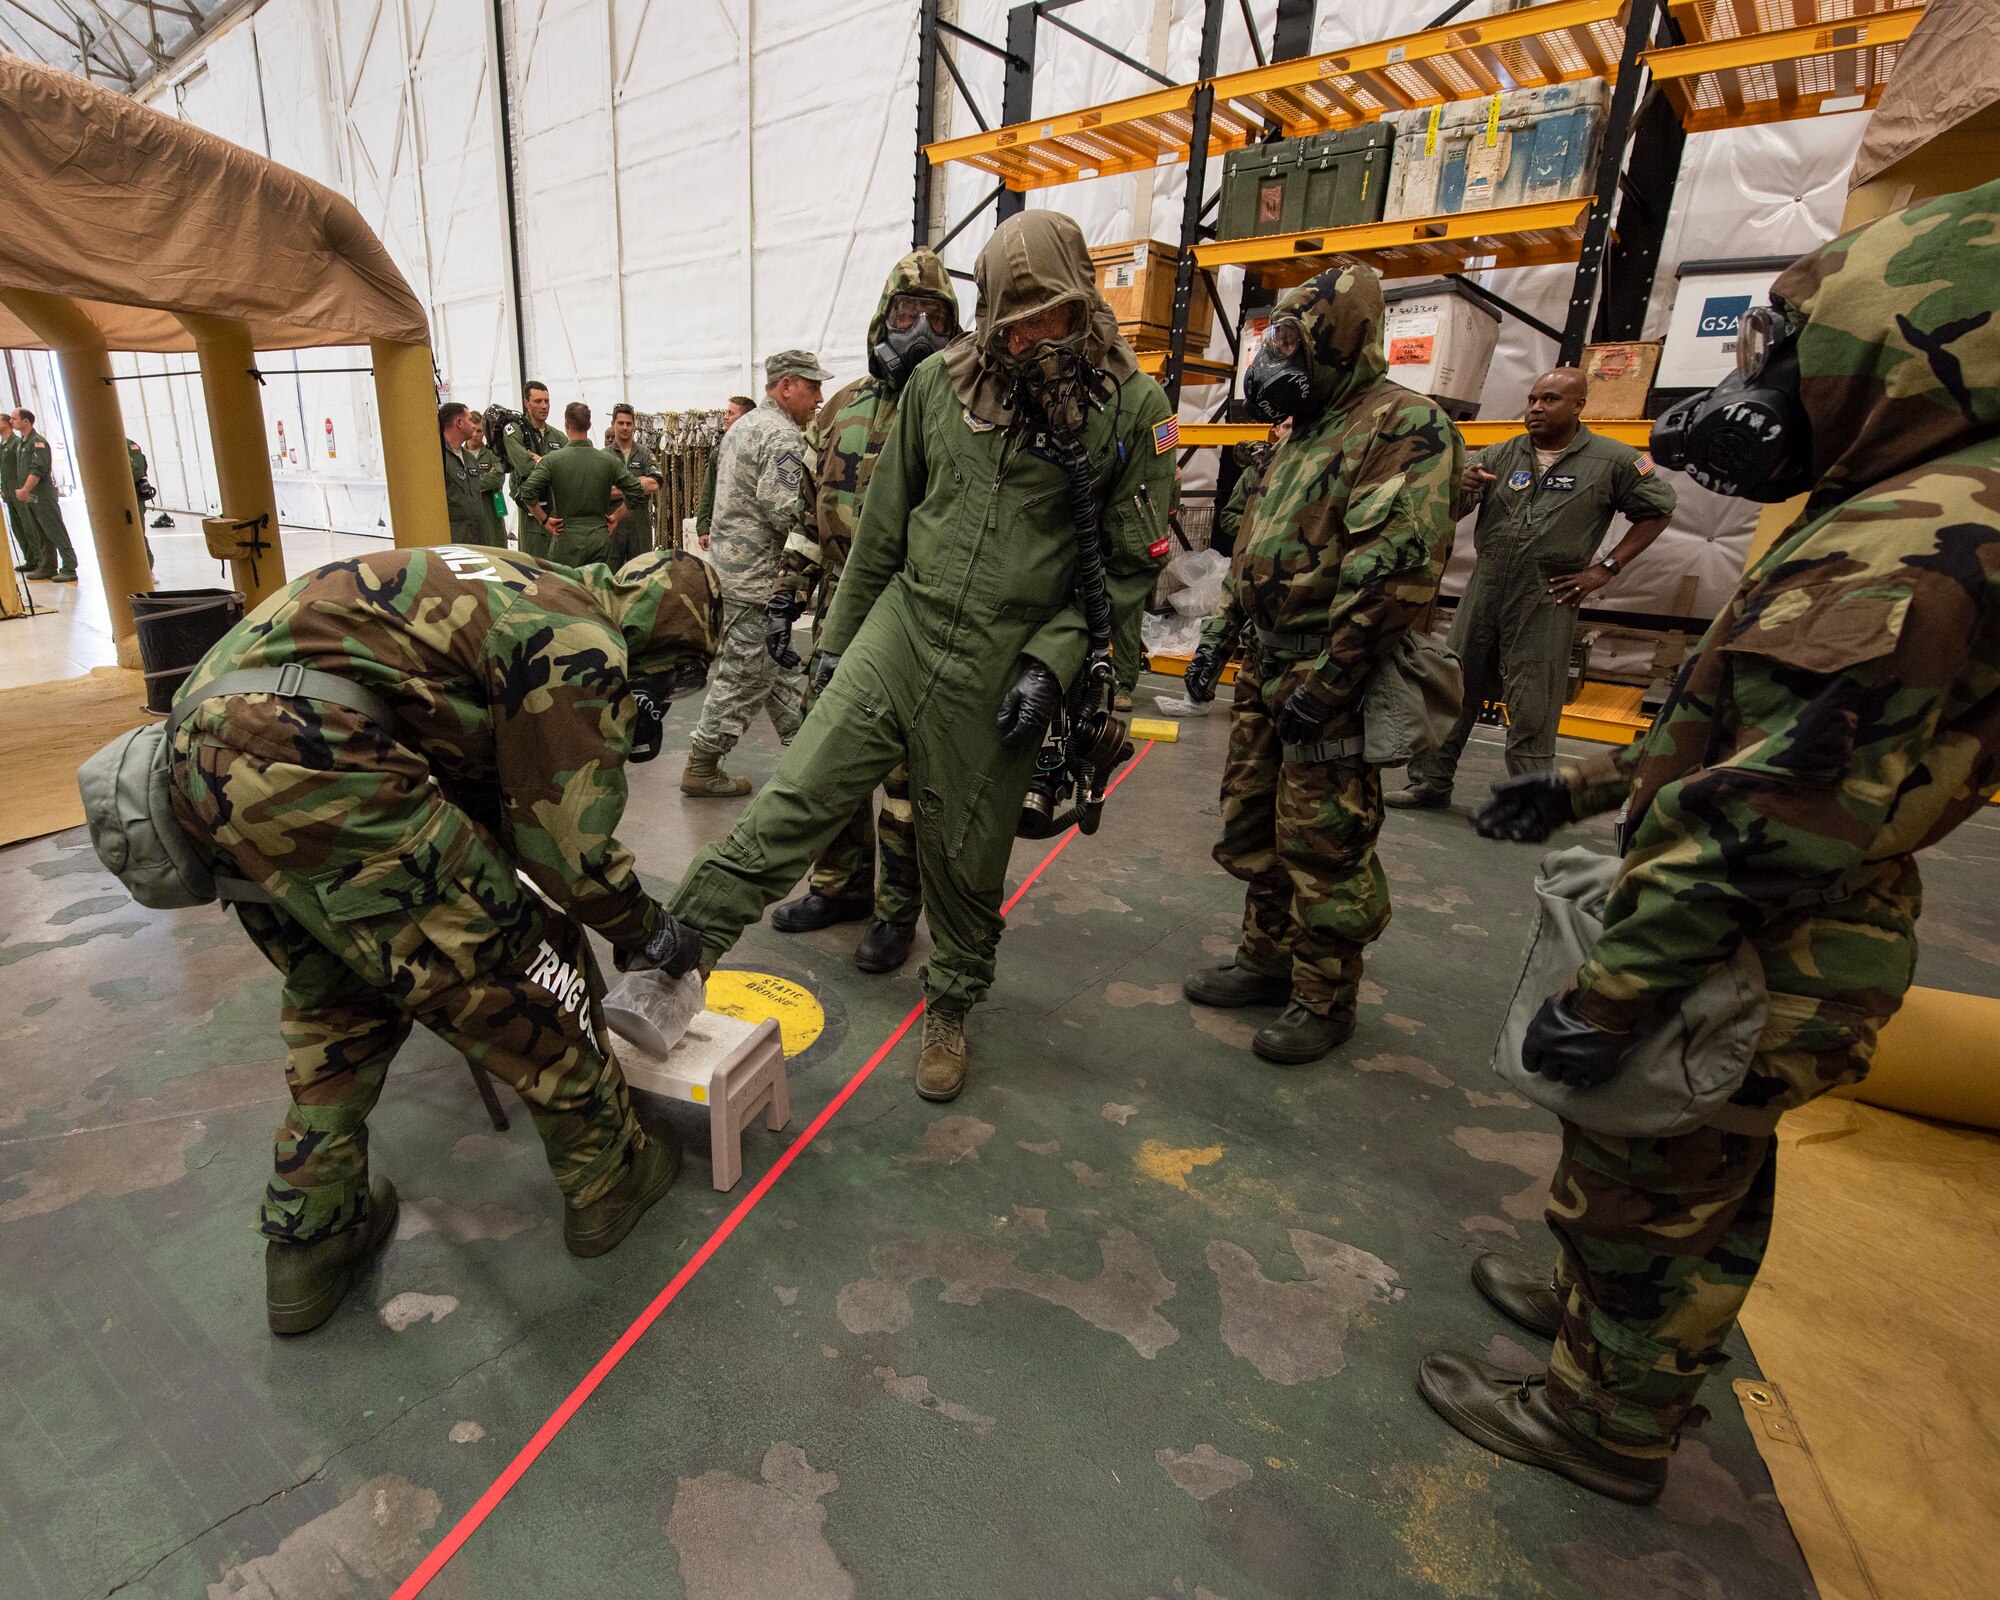 Aircrew flight equipment technicians from the 141st Operations Support Squadron work to decontaminate aircrew members in an Aircrew Contamination Control Area during training June 7, 2018 at Fairchild Air Force Base, Wash. The team set up the ACCA line for training during the wing’s Unit Effectiveness Inspection where inspectors from Air Mobility Command reviewed and provided feedback as part of the UEI.